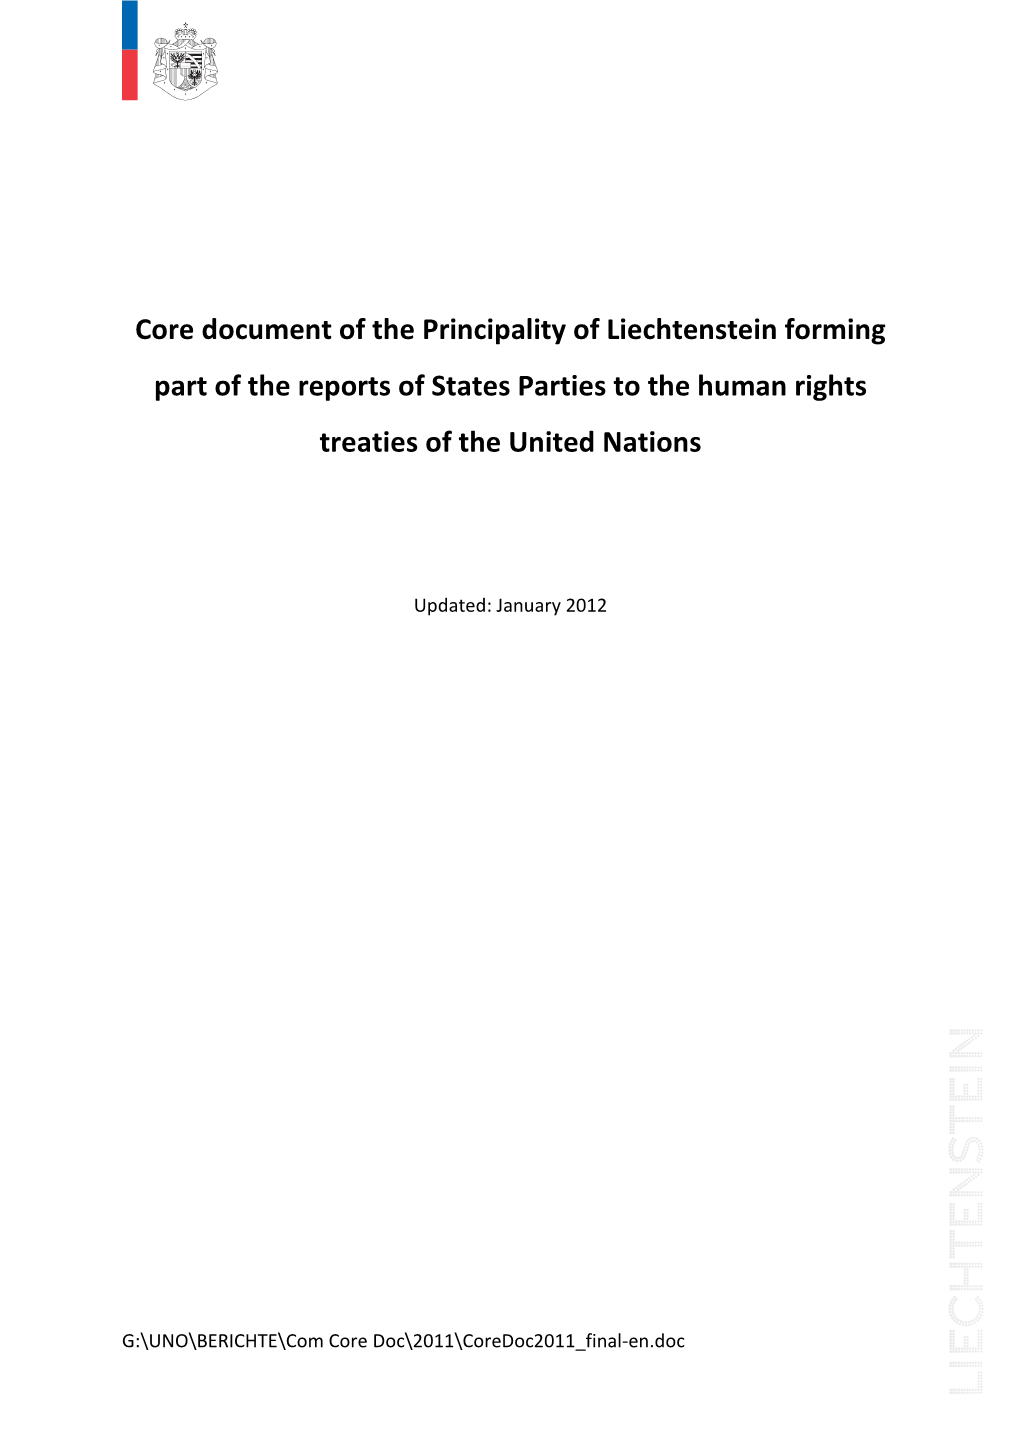 Core Document of the Principality of Liechtenstein Forming Part of the Reports of States Parties to the Human Rights Treaties of the United Nations